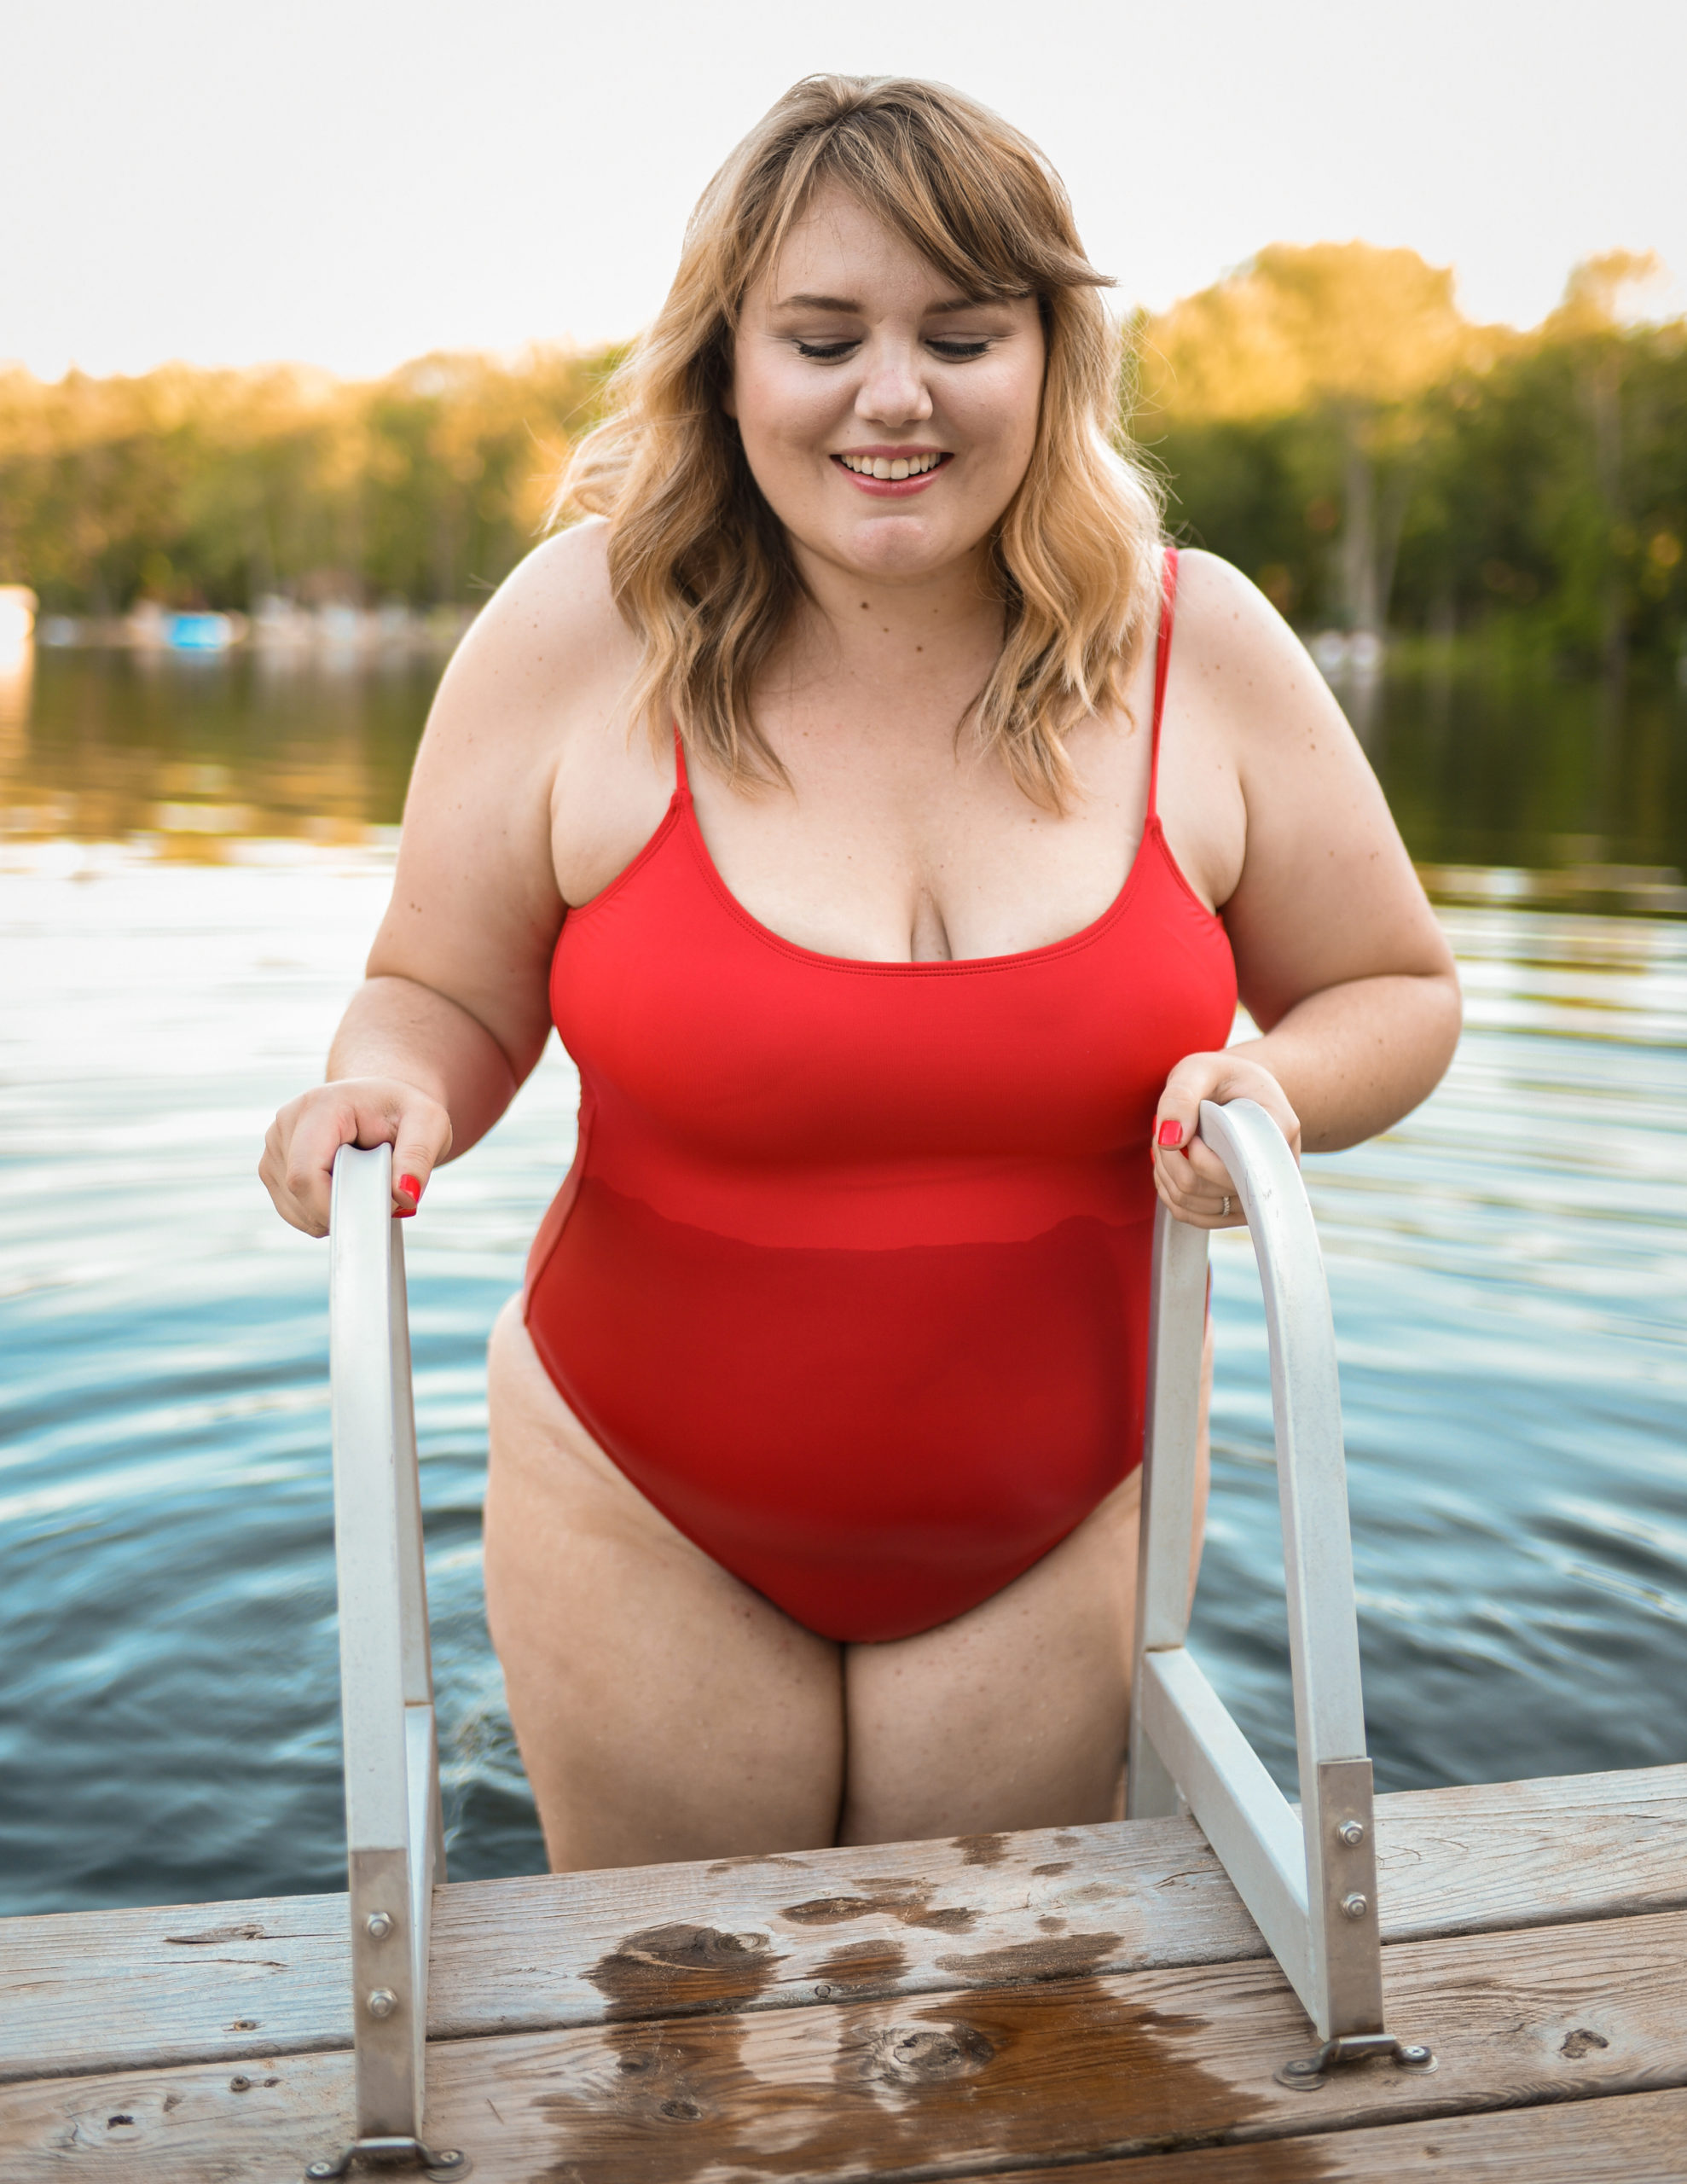 Lake Life With Andie Swim. Andie Swim is a size inclusive swim brand that creates quaility suits for every woman. I am featuring three one piece suits. 